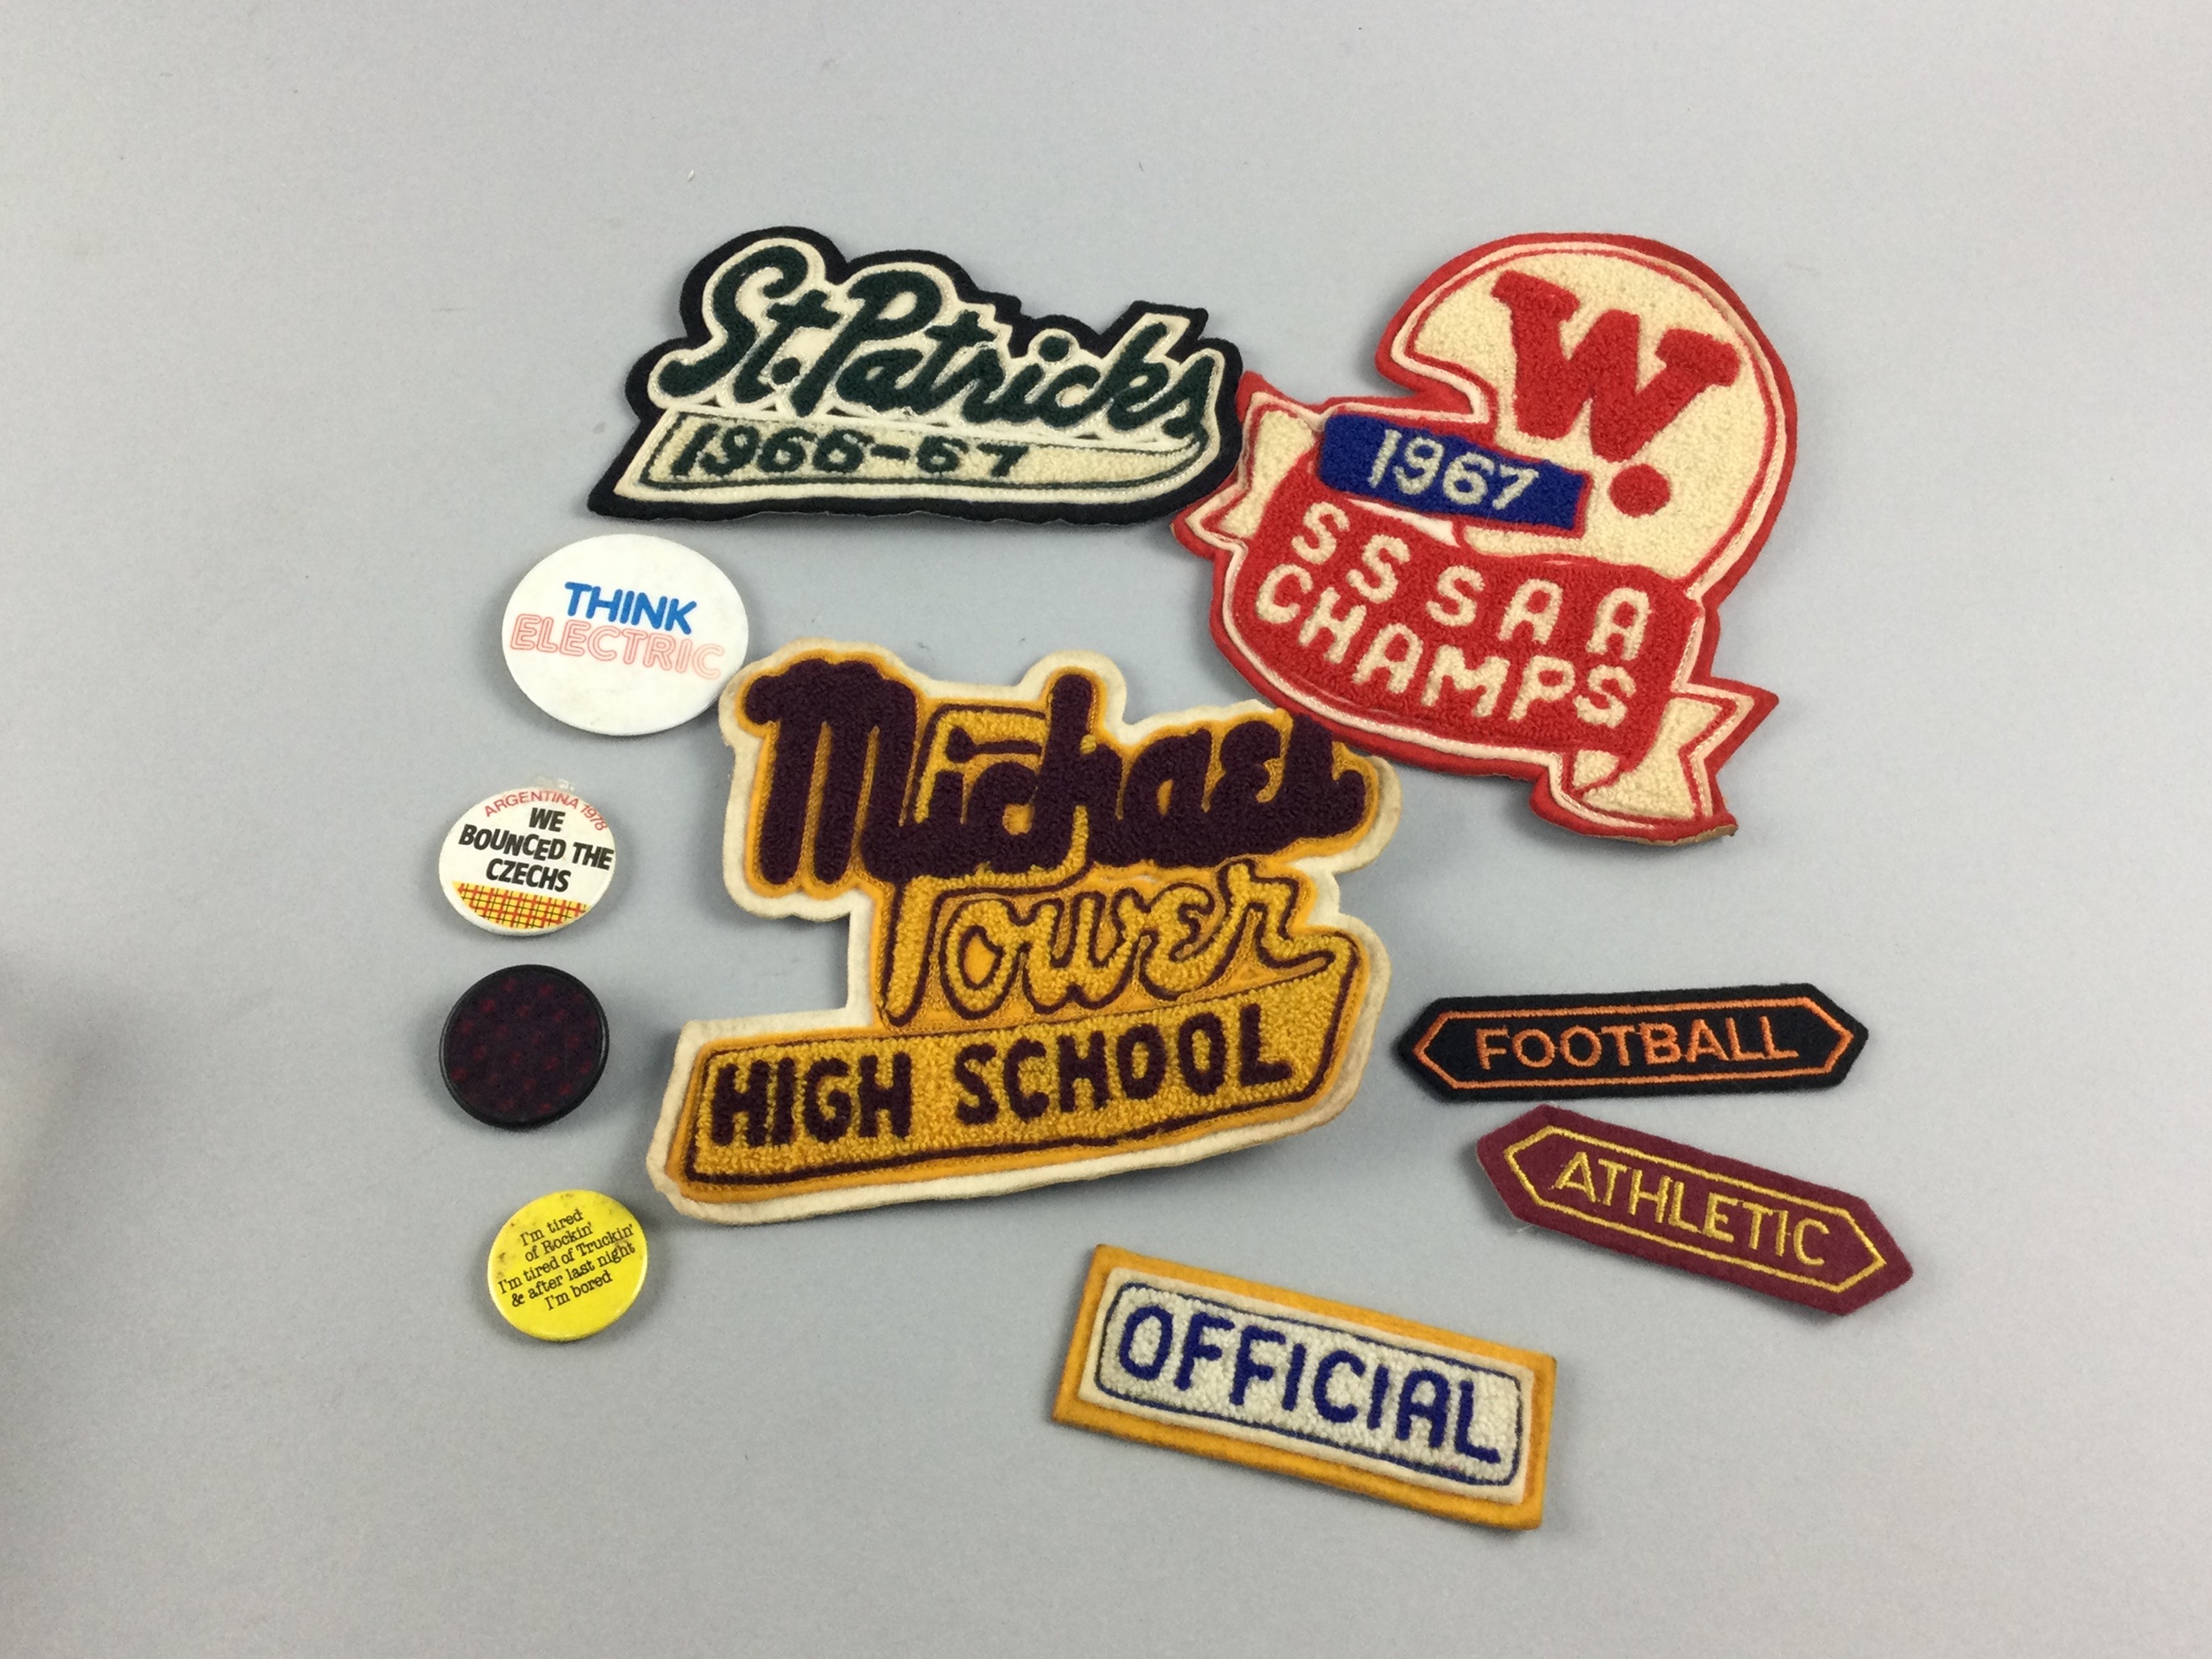 A COLLECTION OF CANADIAN 1960/70'S VARSITY EMBROIDERED PATCHES ALONG WITH 70s PINBADGES